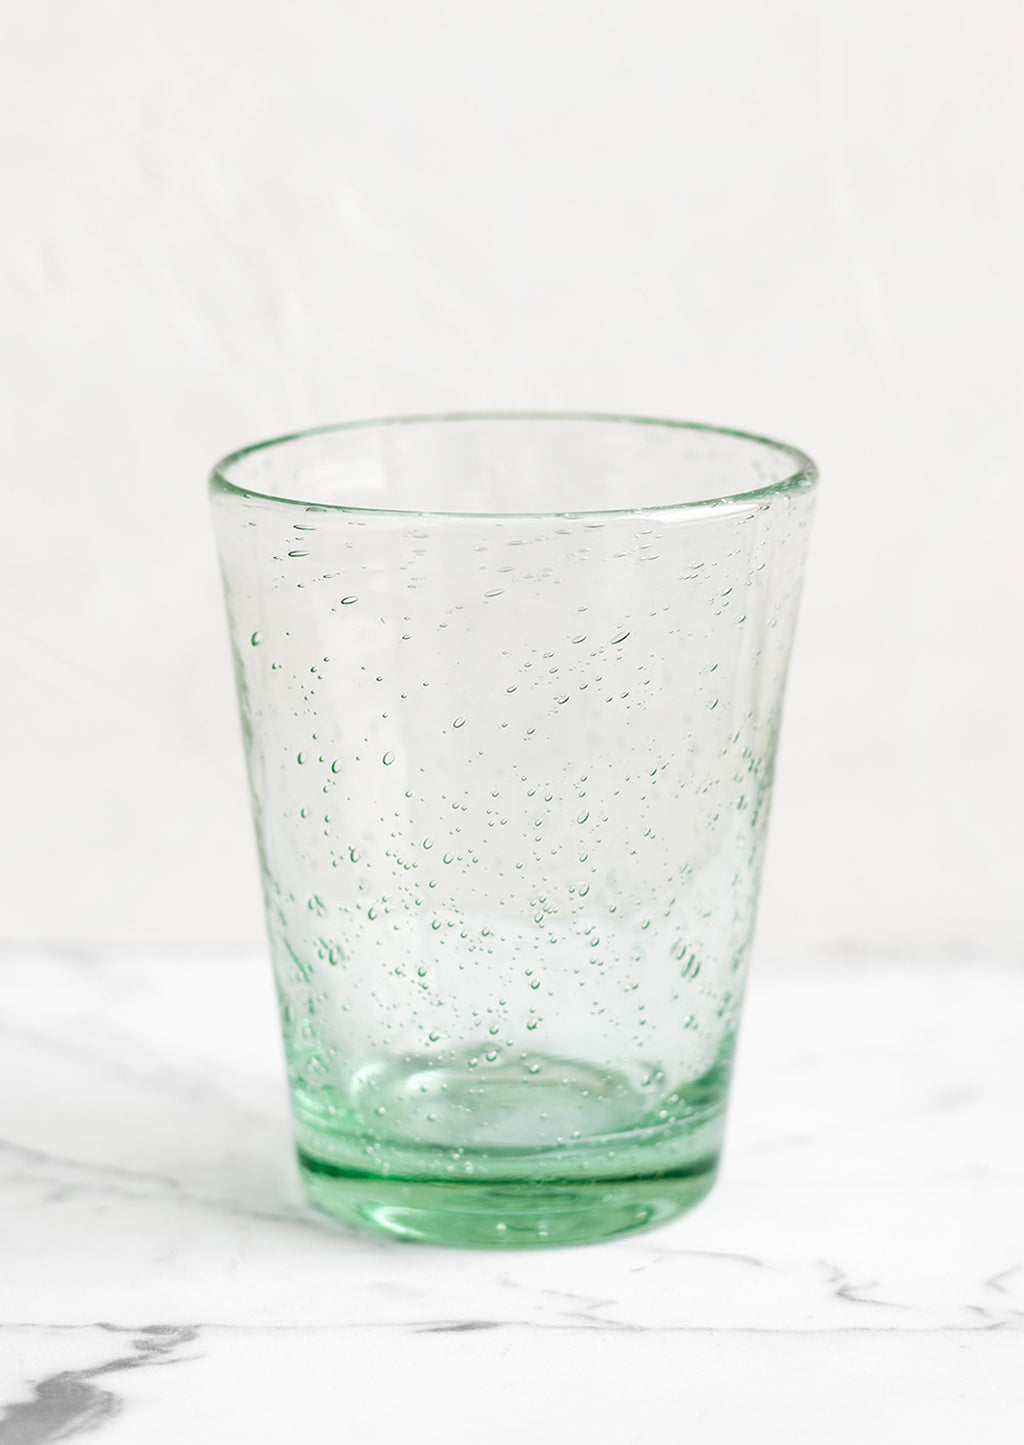 Bottle Green: A glass tumbler cup in light green seeded glass.